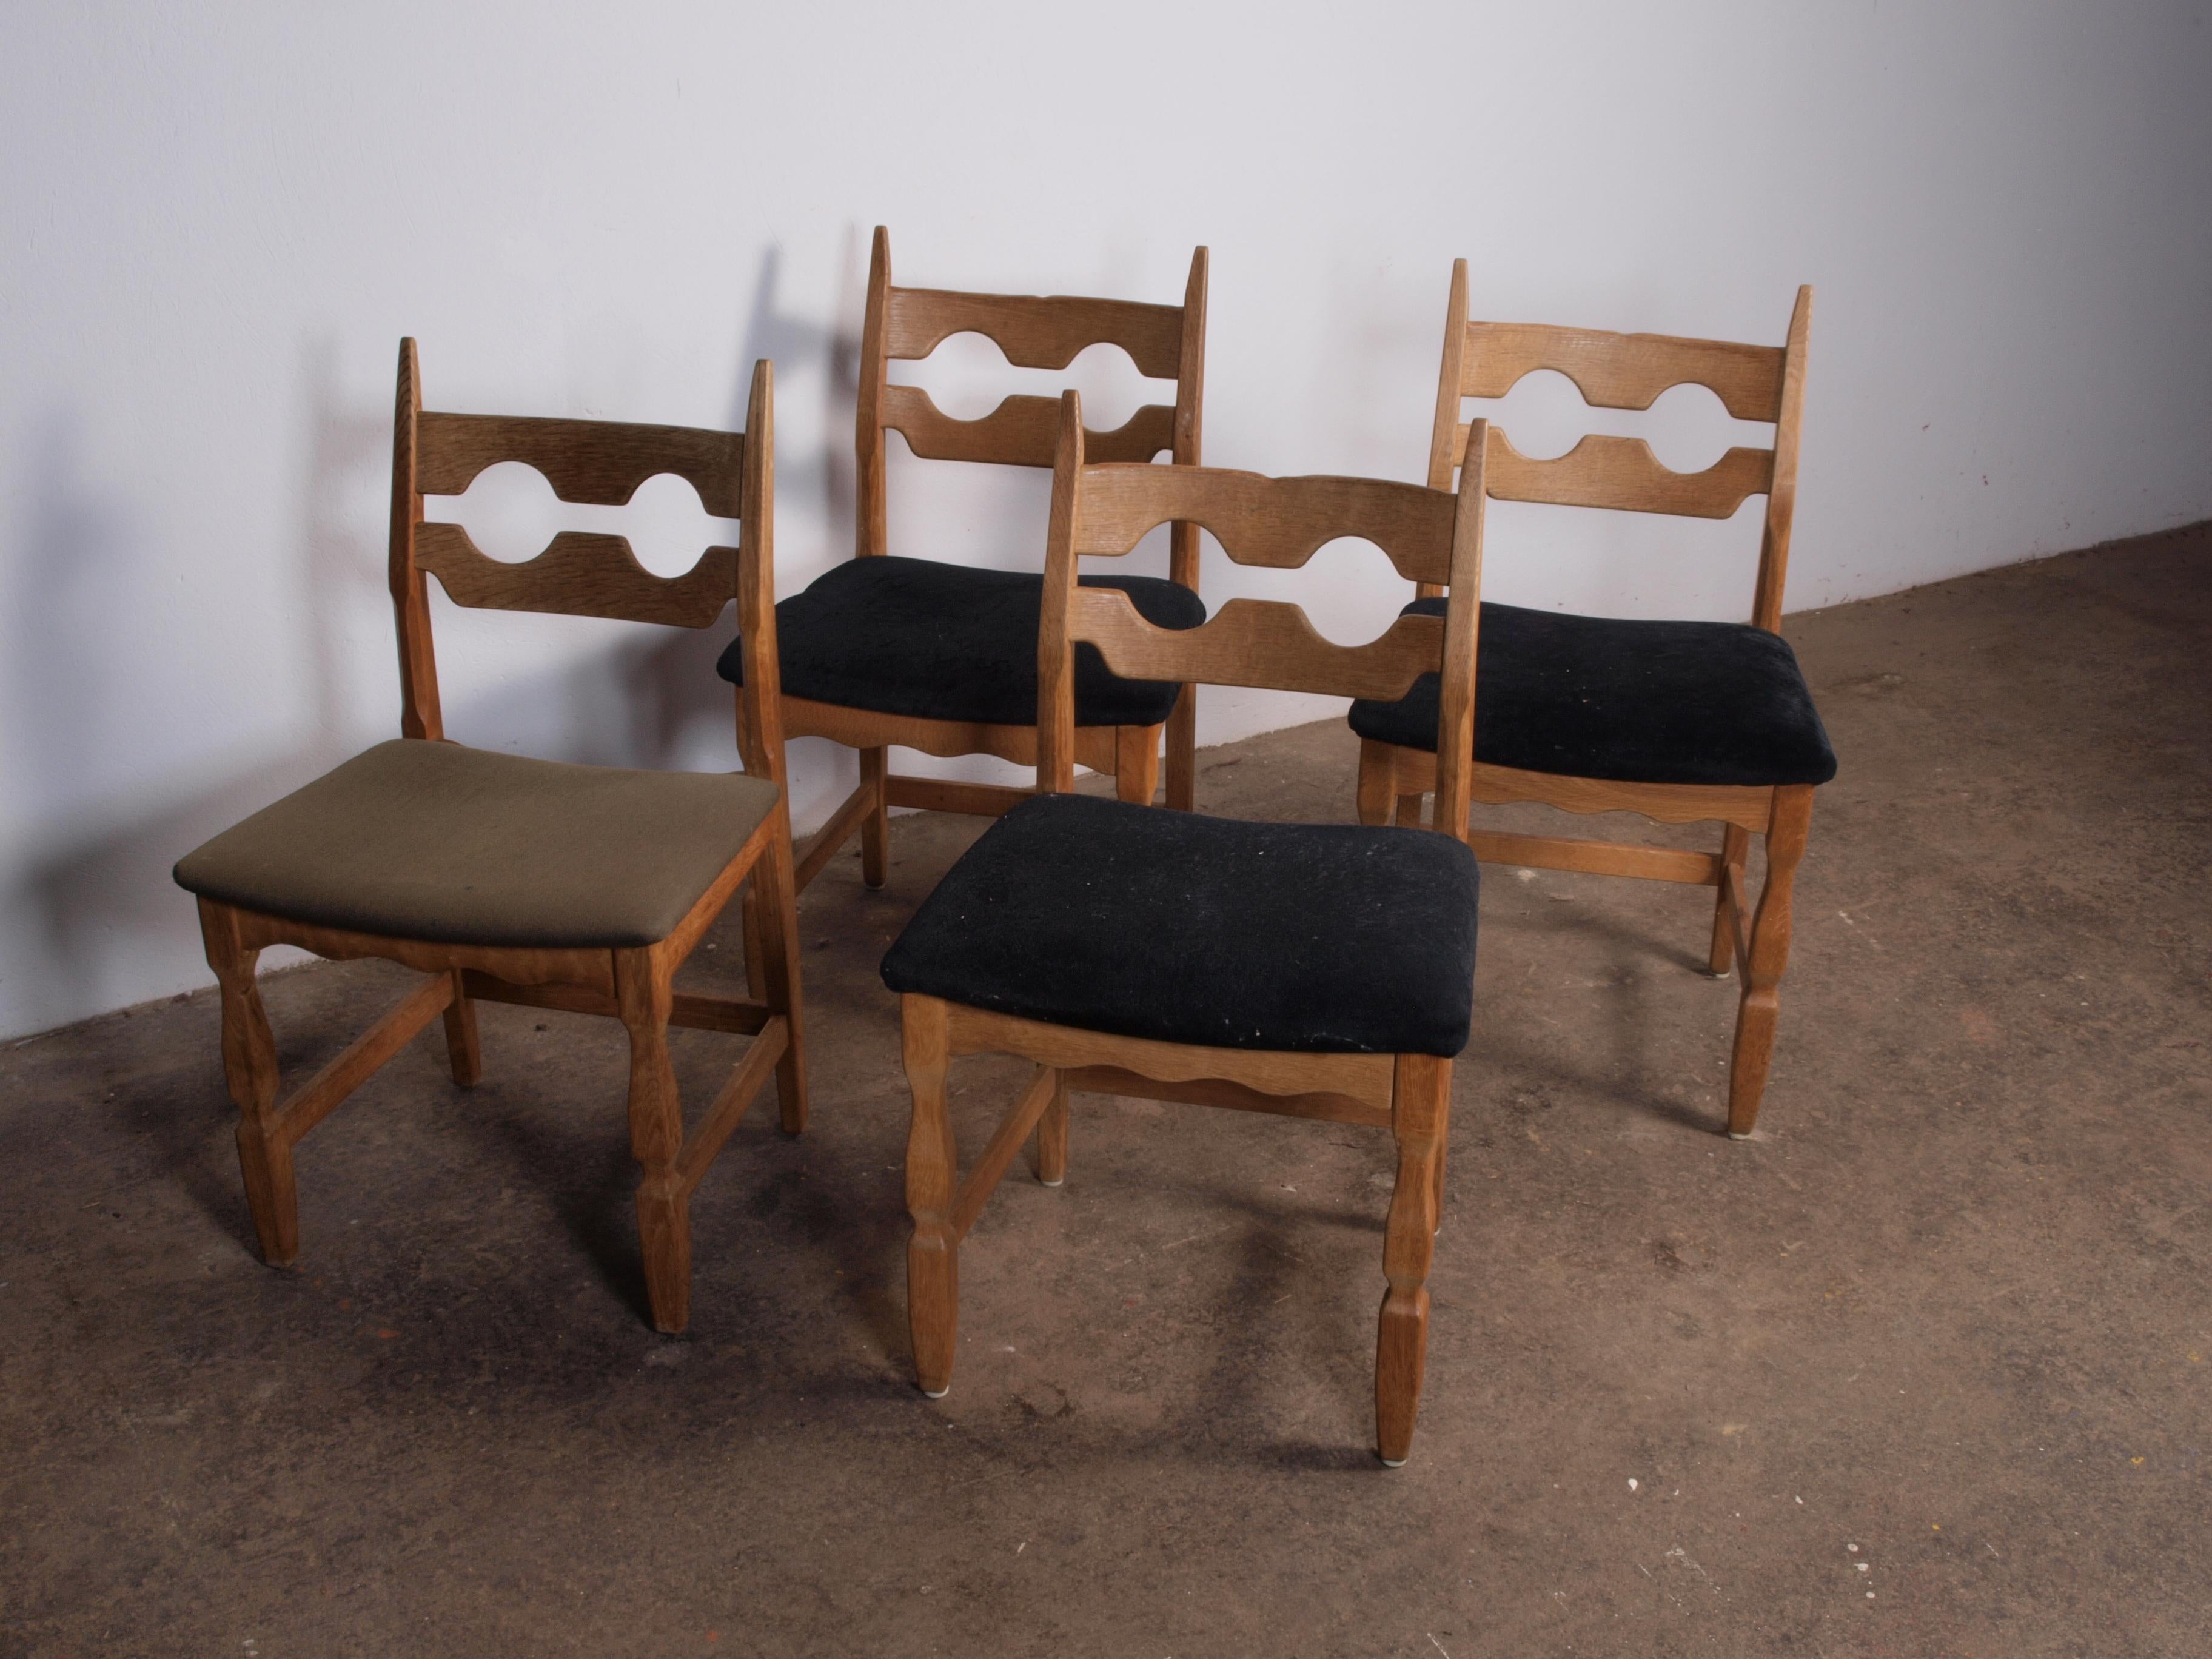 Henning Kjærnulf's striking dining chairs, crafted from oak and showcase a captivating blend of Baroque and Mid-Century Modern influences. Known as the Razorblade model, these classic chairs were produced by Nyrup Møbelfabrik during the 1960s-1970s